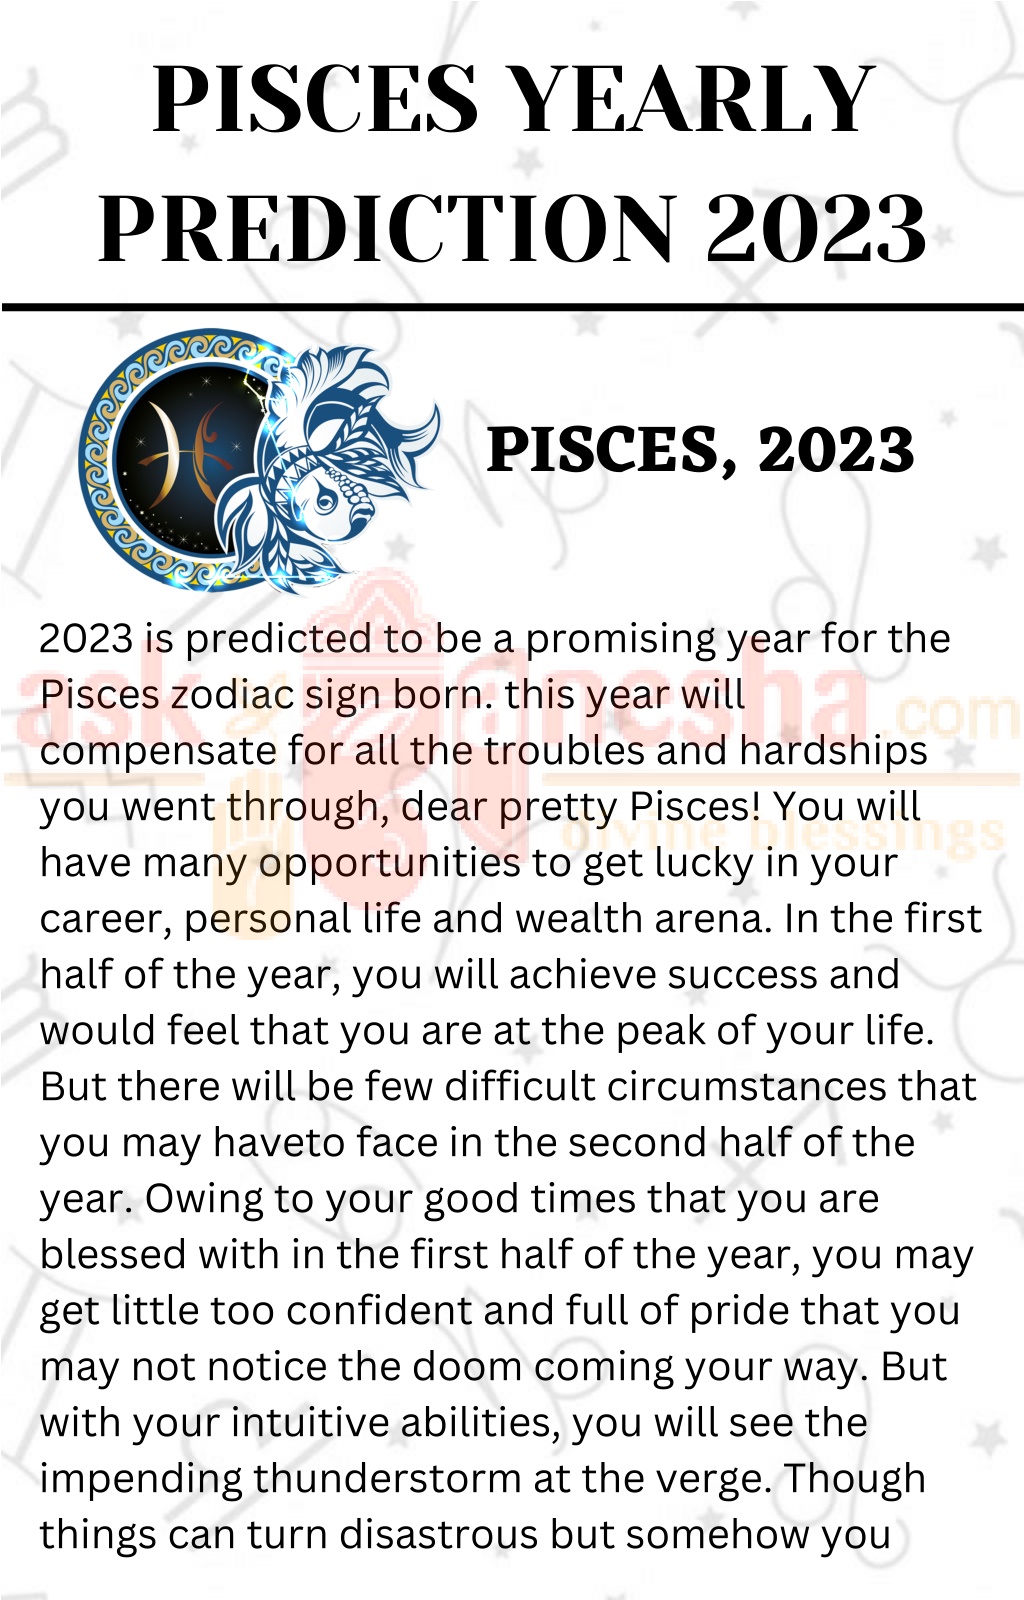 PPT Pisces Yearly Horoscope 2023 PowerPoint Presentation, free